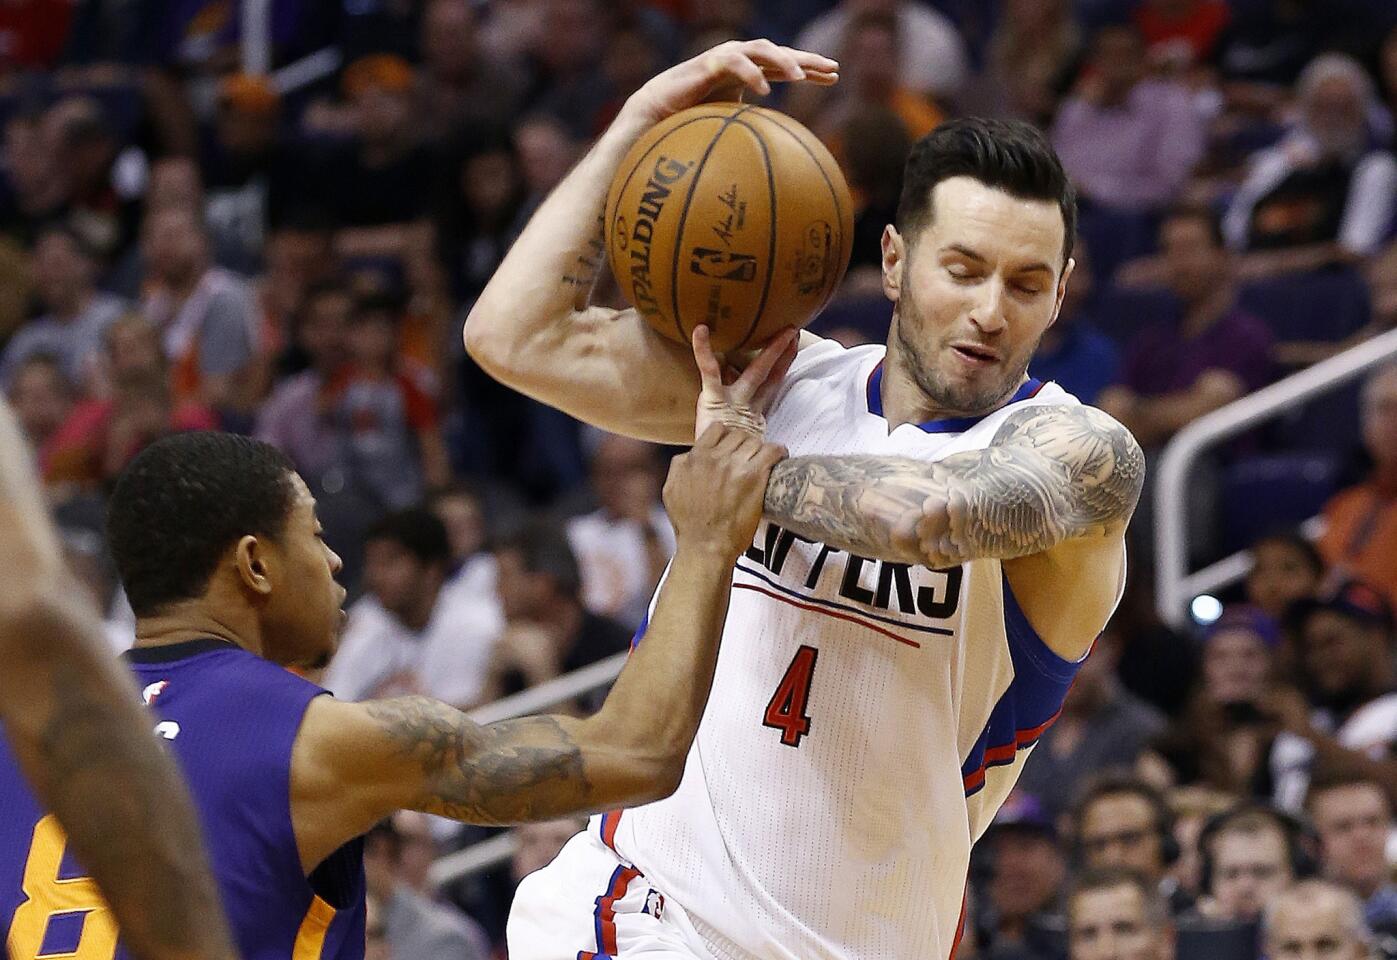 Suns guard Tyler Ulis tries to steal the ball from Clippers guard J.J. Redick (4) during the first half.